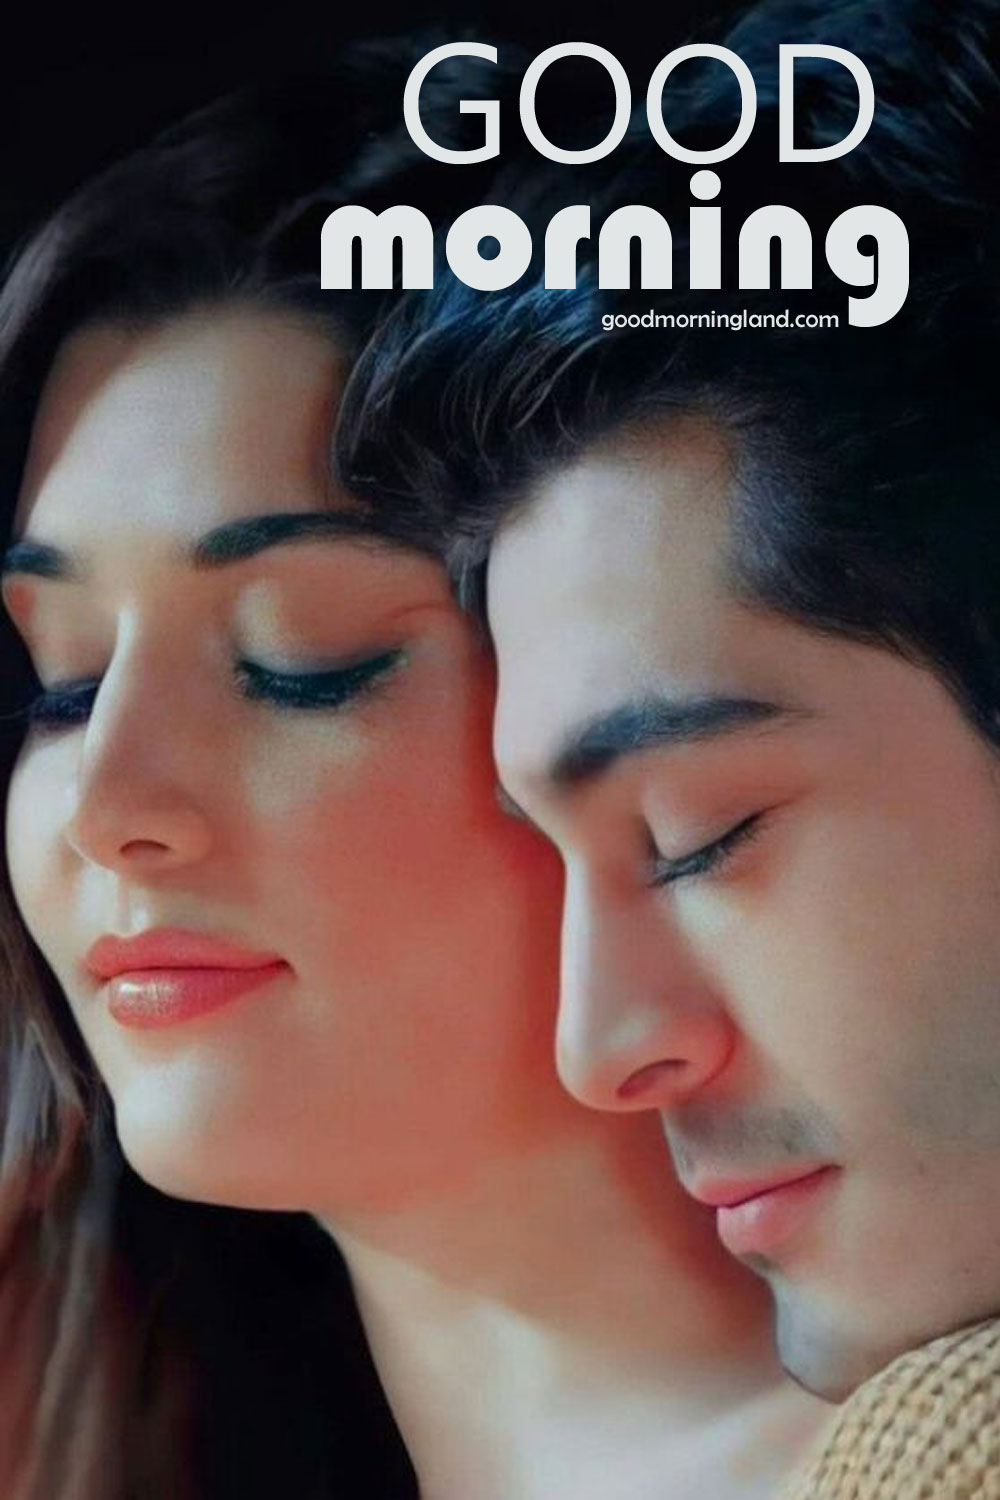 Good Morning Love Whatsapp Status - Good Morning Images, Quotes ...